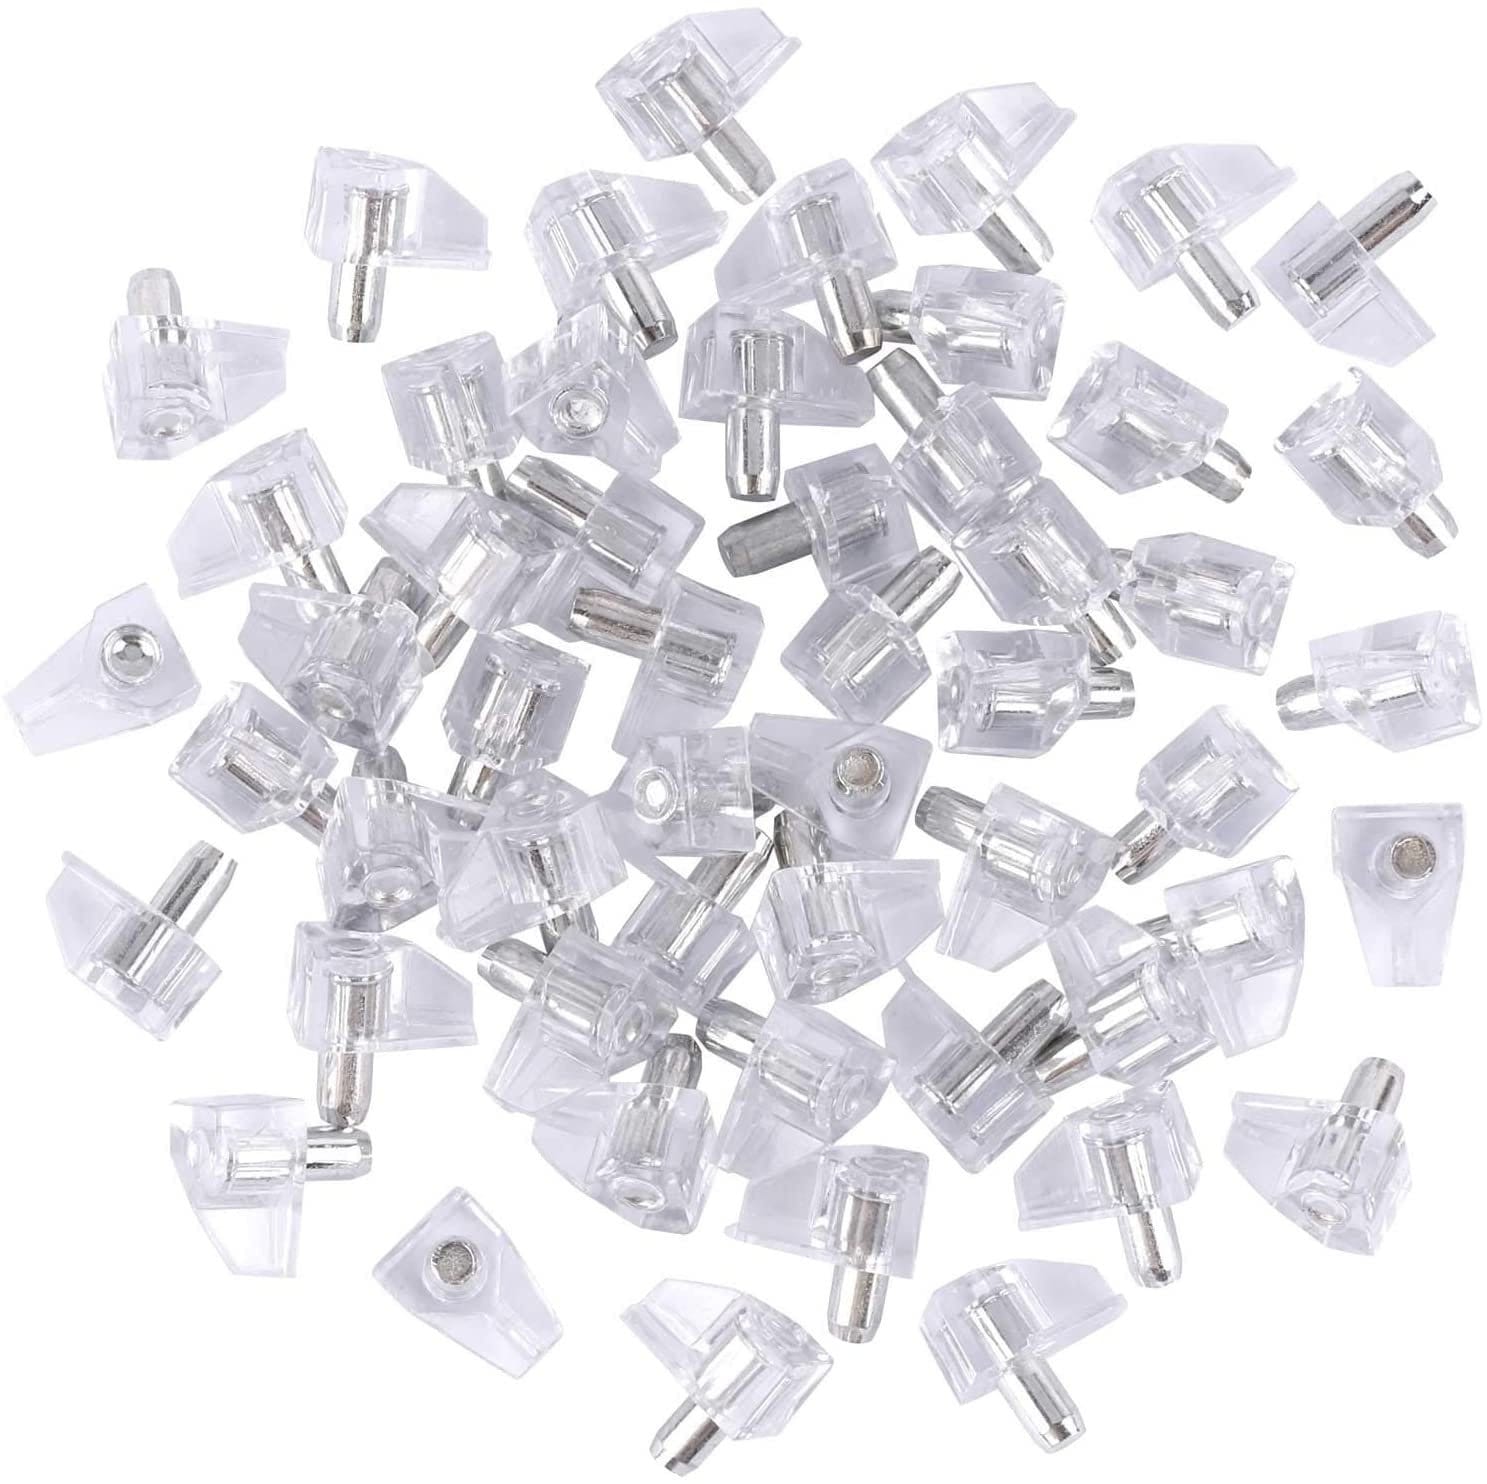 8 Pins 5mm Shelf Pegs Pins Cabinet Furniture Spoon Shape Support Pegs for  Shelves Nickel Plated 